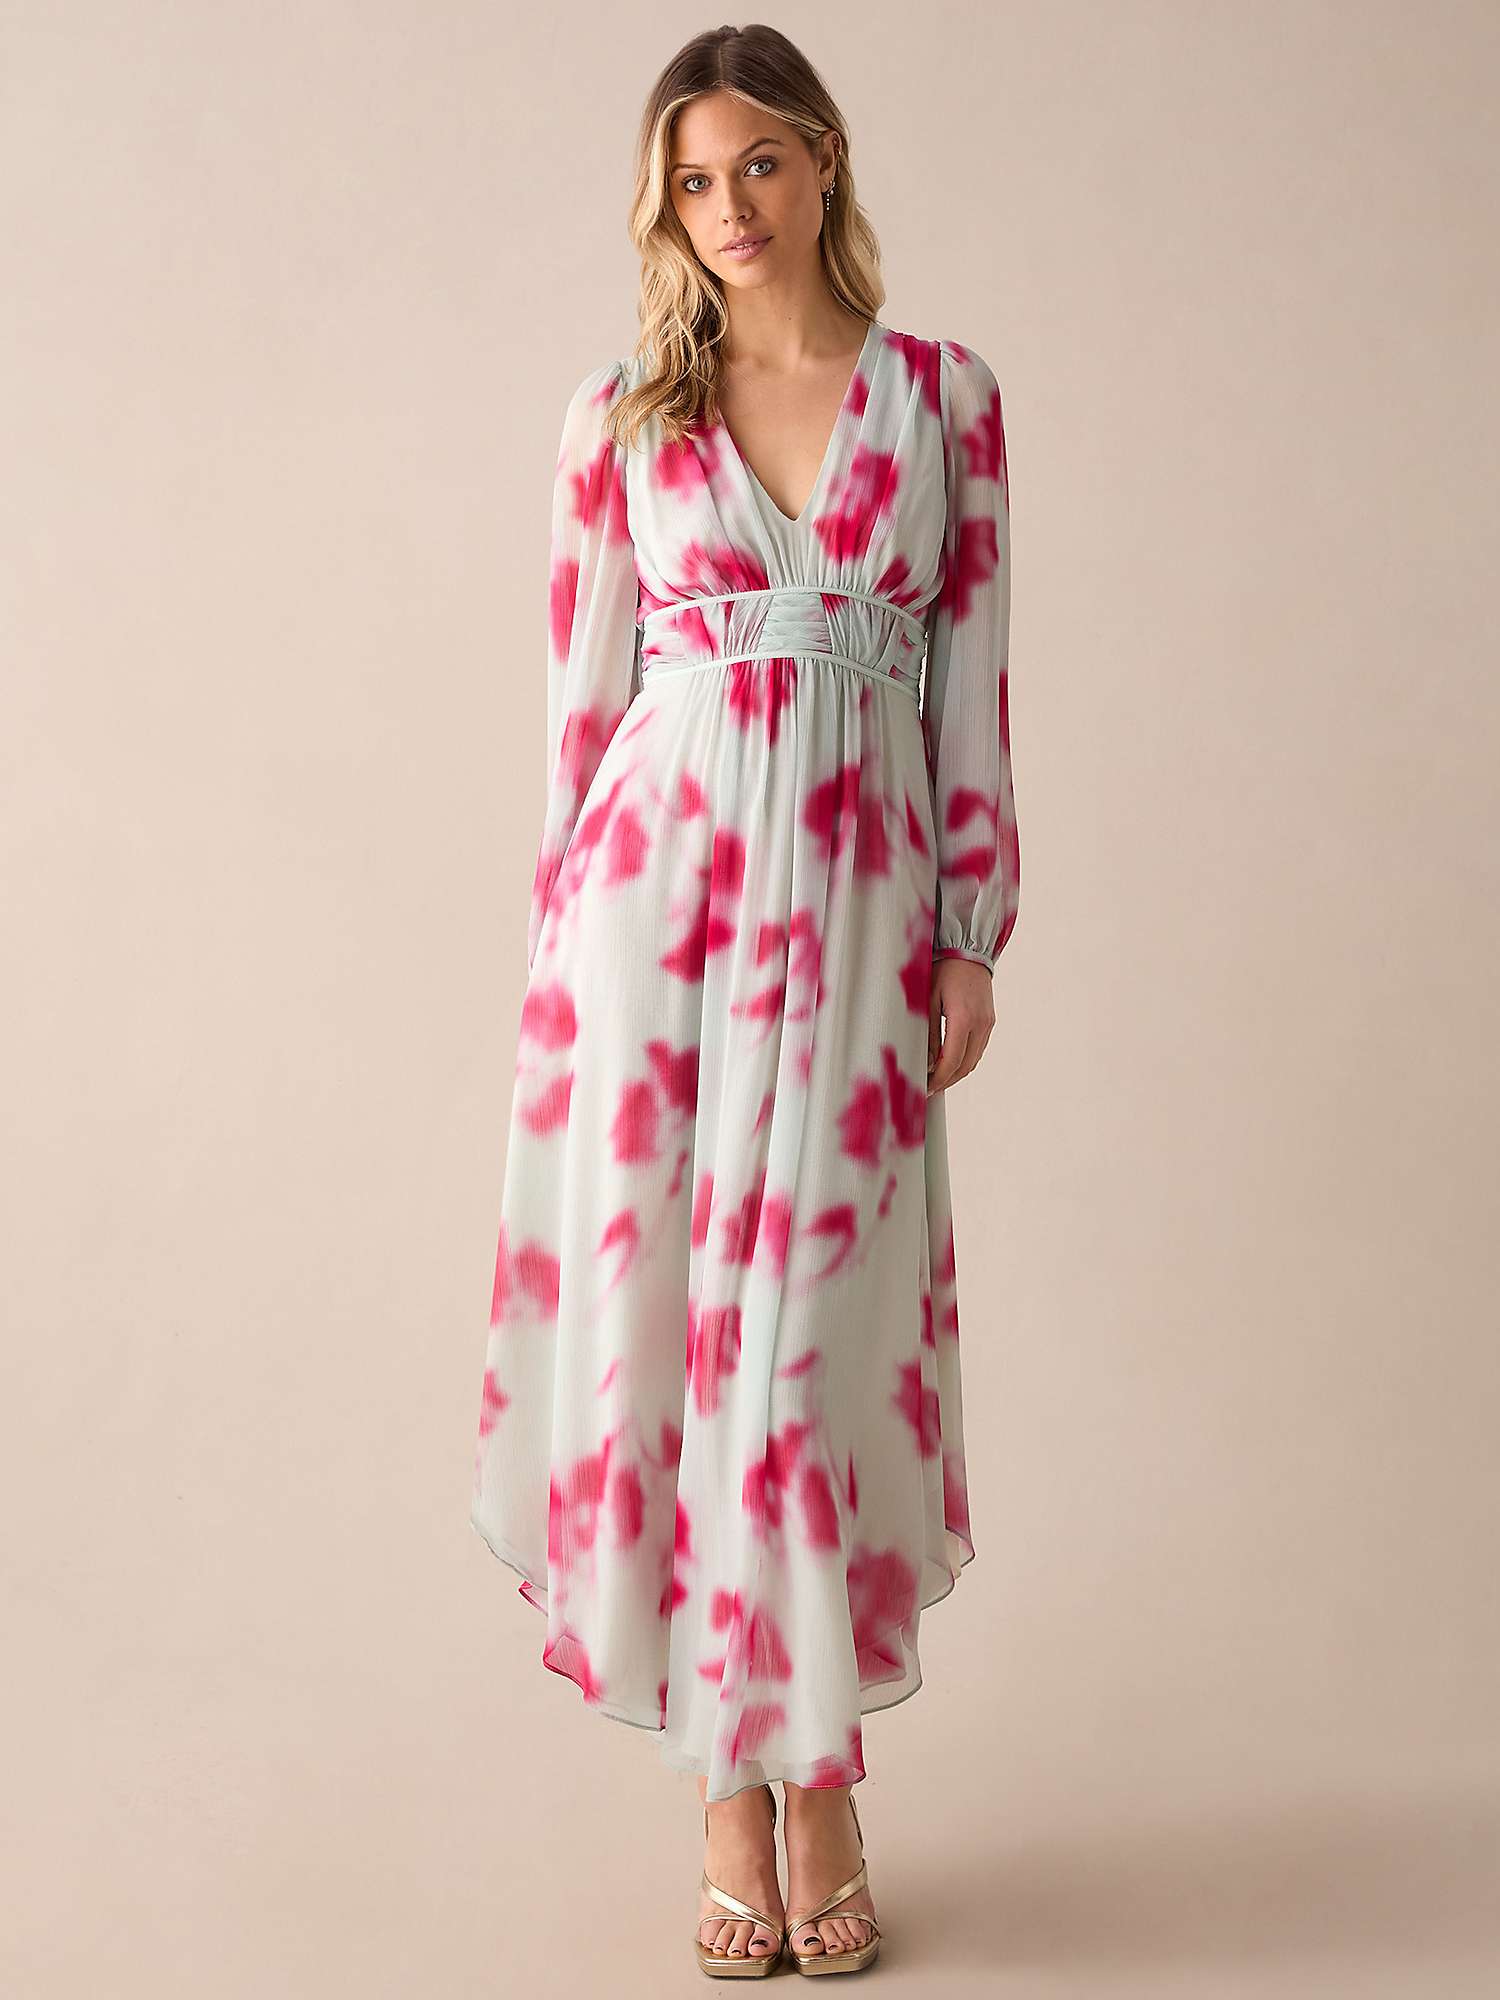 Buy Ro&Zo Stephanie Blurred Floral Maxi Dress, Pink/White Online at johnlewis.com